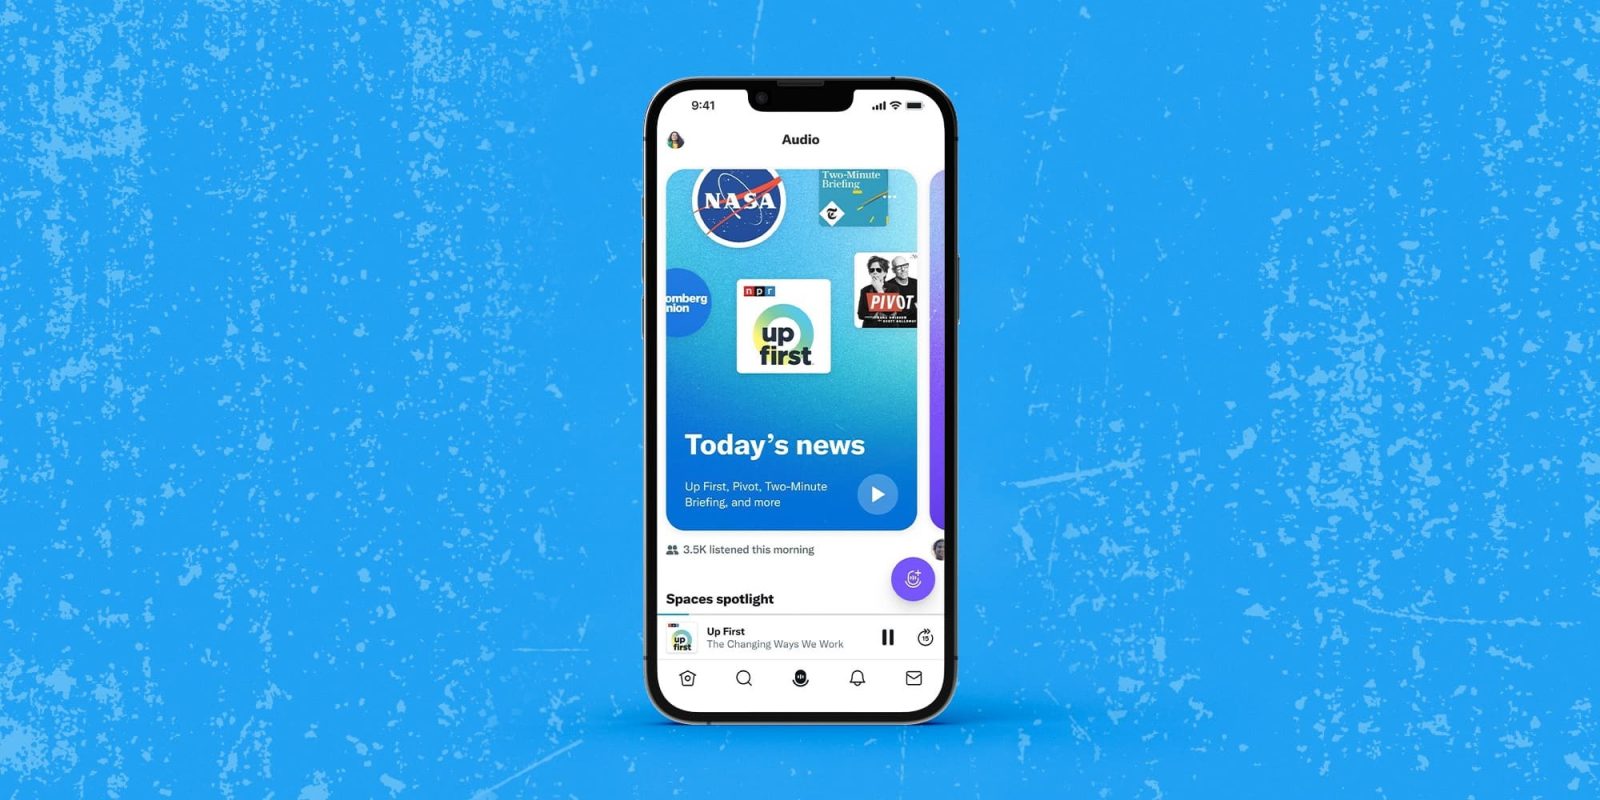 Twitter is becoming a true podcast platform with latest Spaces update